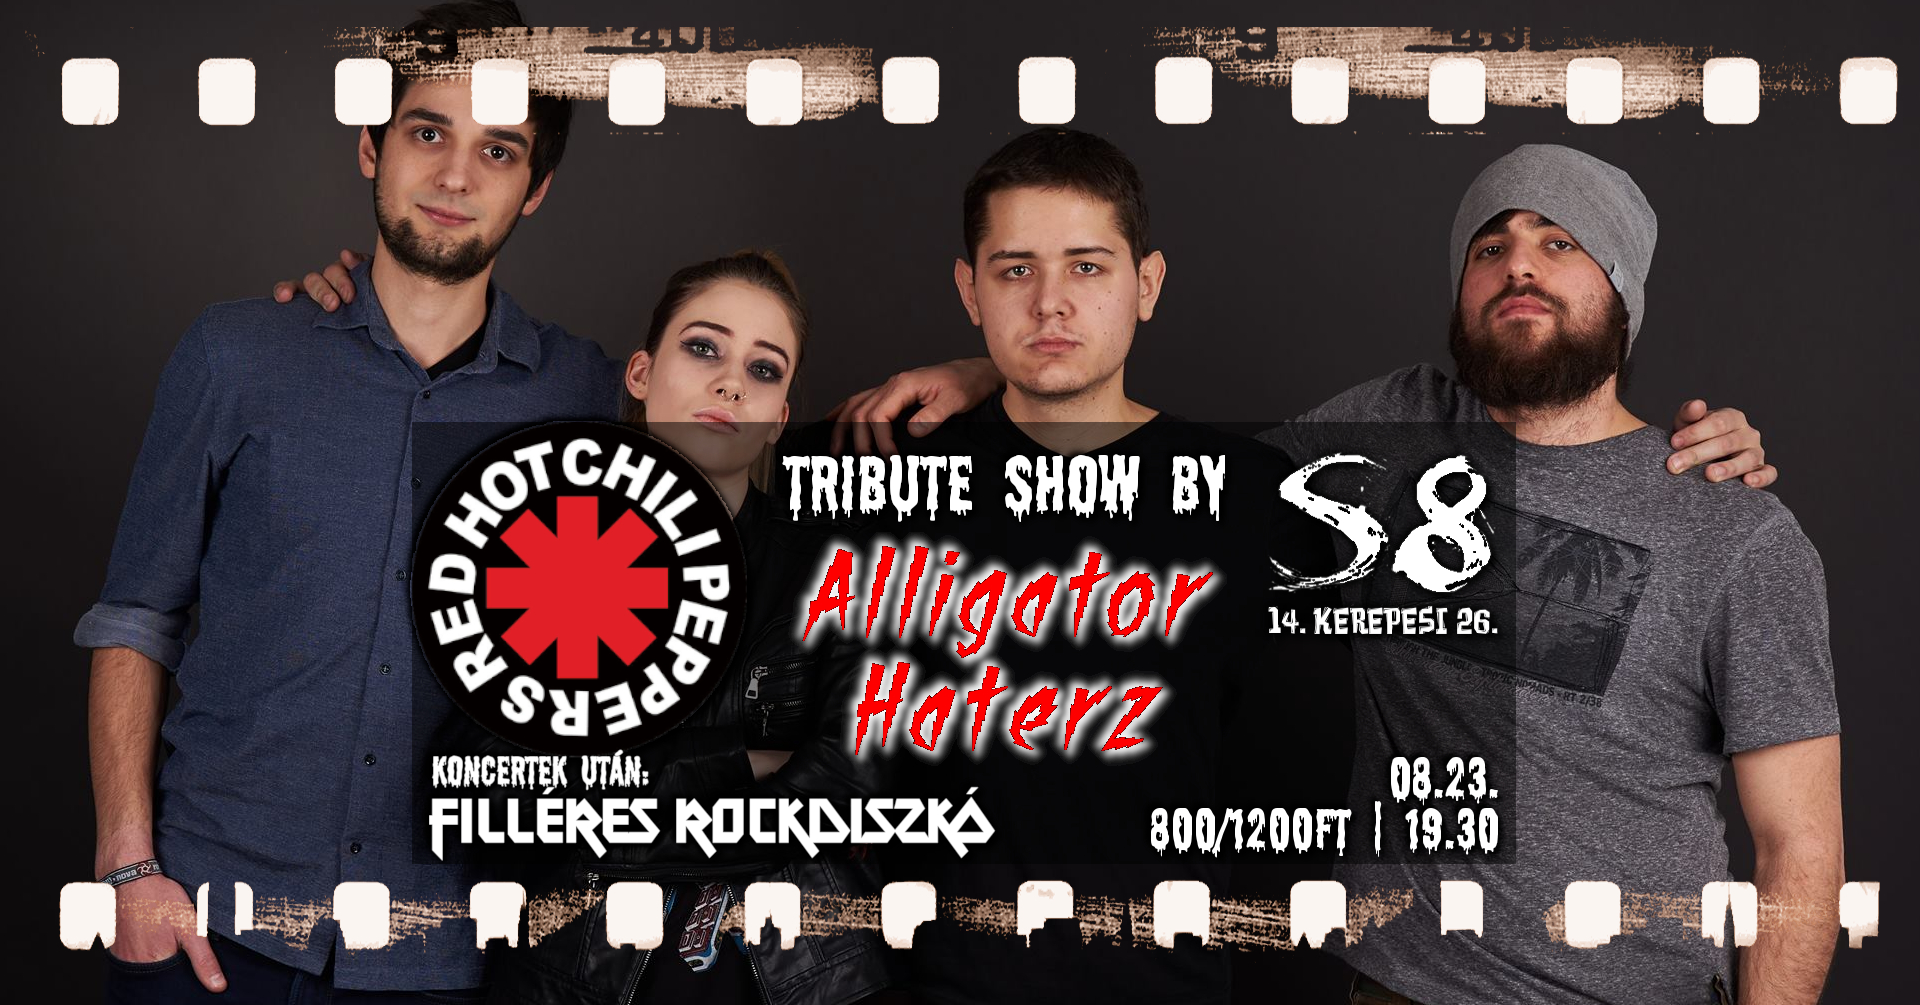 RHCP Tribute Show by Alligator Haterz